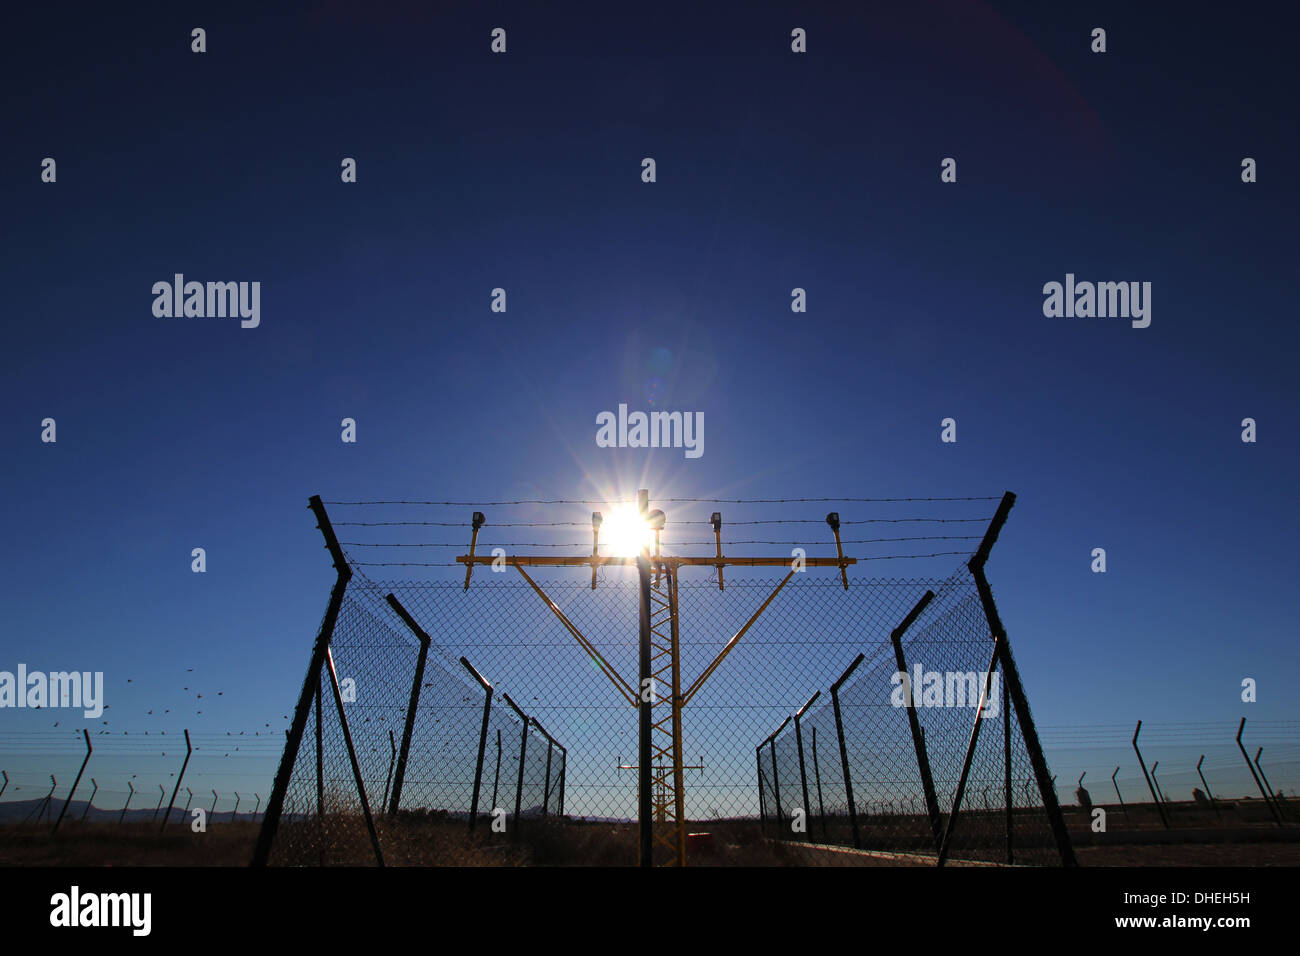 Airport runway lights behind a perimeter fence Stock Photo